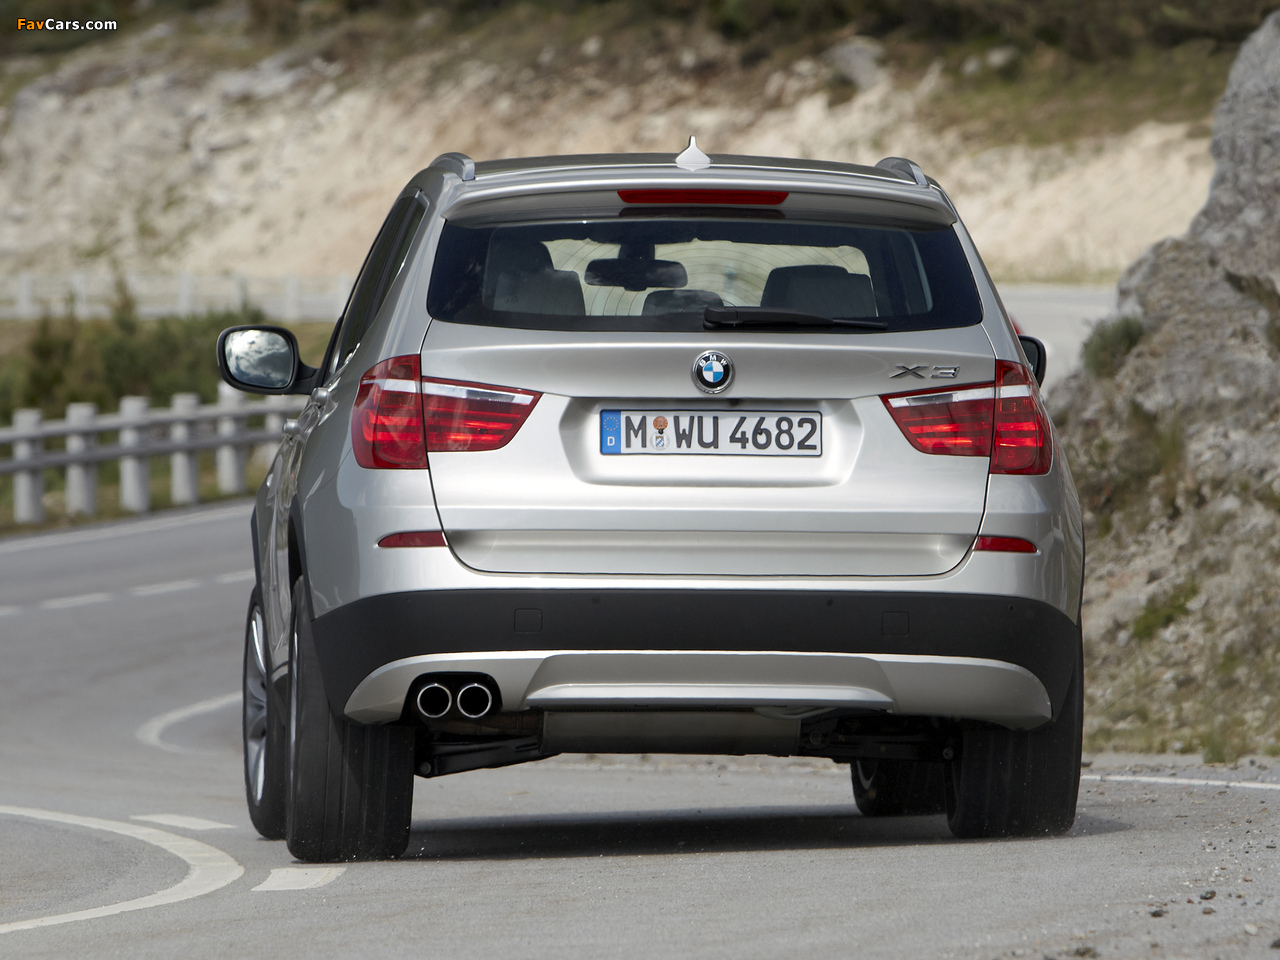 BMW X3 xDrive35i (F25) 2010 pictures (1280 x 960)